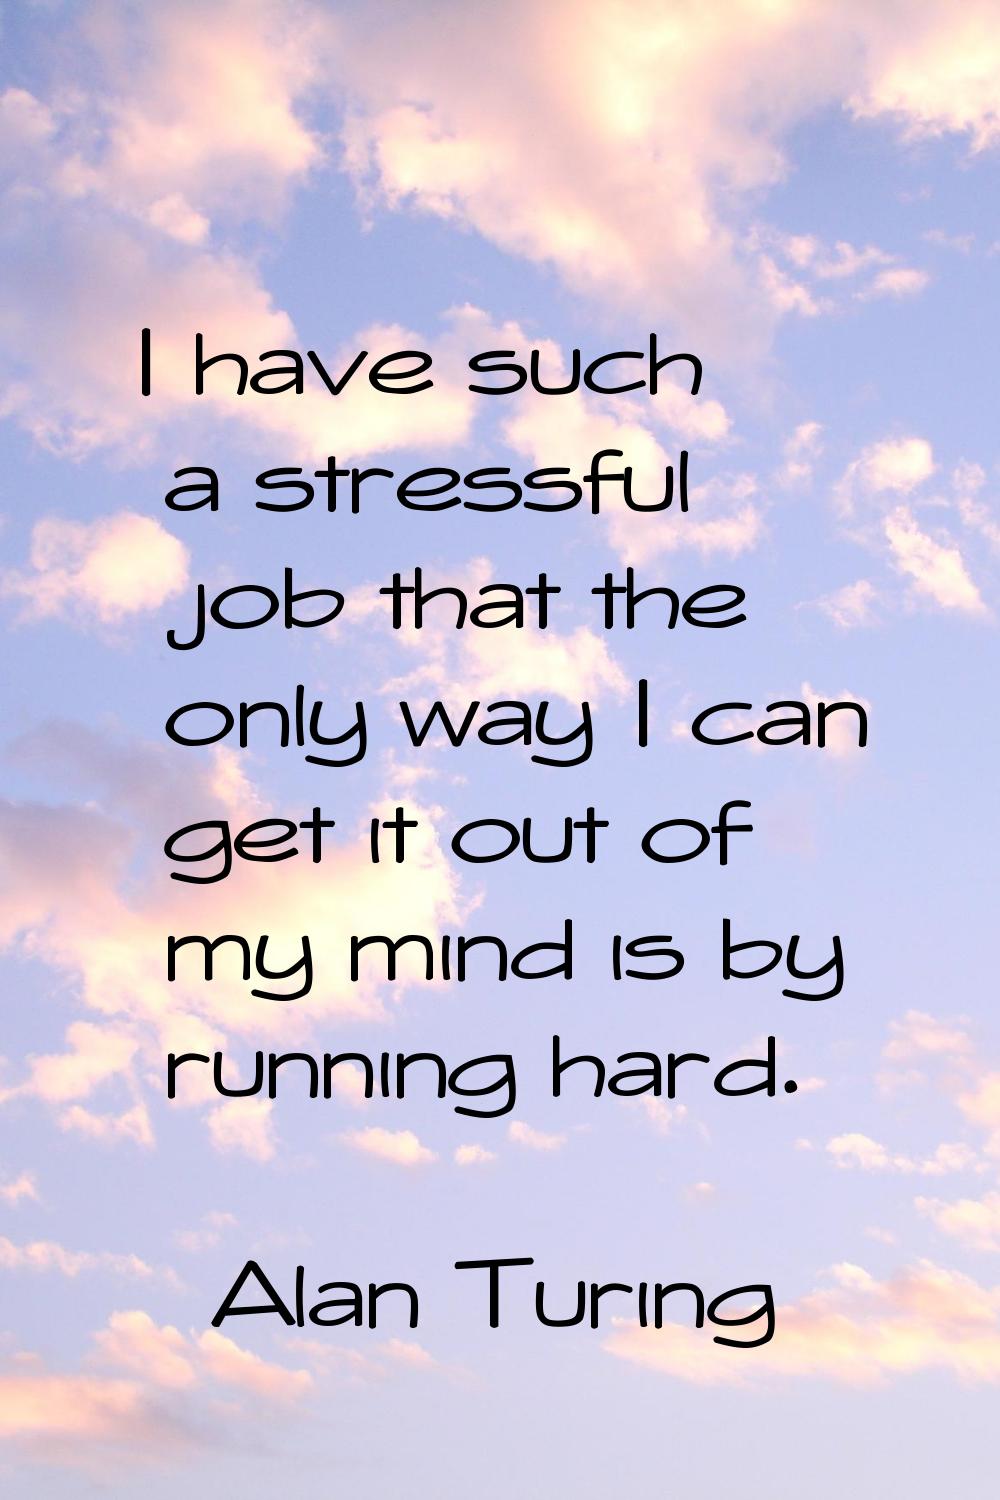 I have such a stressful job that the only way I can get it out of my mind is by running hard.